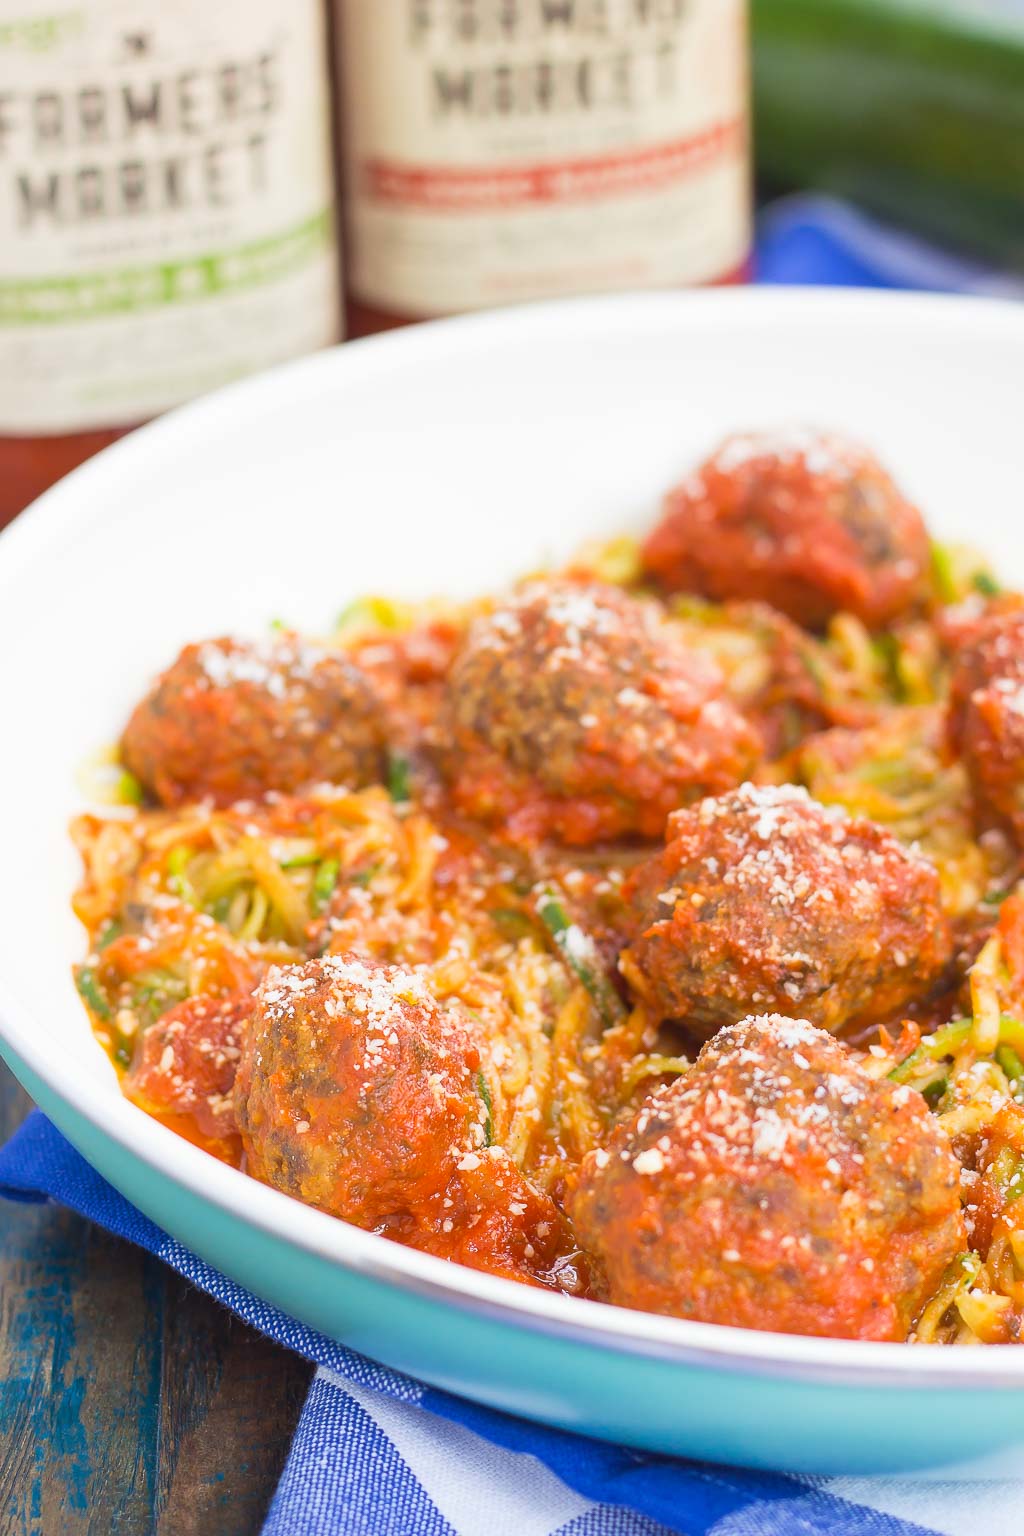 These Tomato Basil Zoodles with Meatballs makes a simple, fresh, and easy weeknight meal. Filled with fresh zucchini noodles, a tomato basil marinara sauce, and hearty meatballs, this dish comes together in minutes and is bursting with flavor!